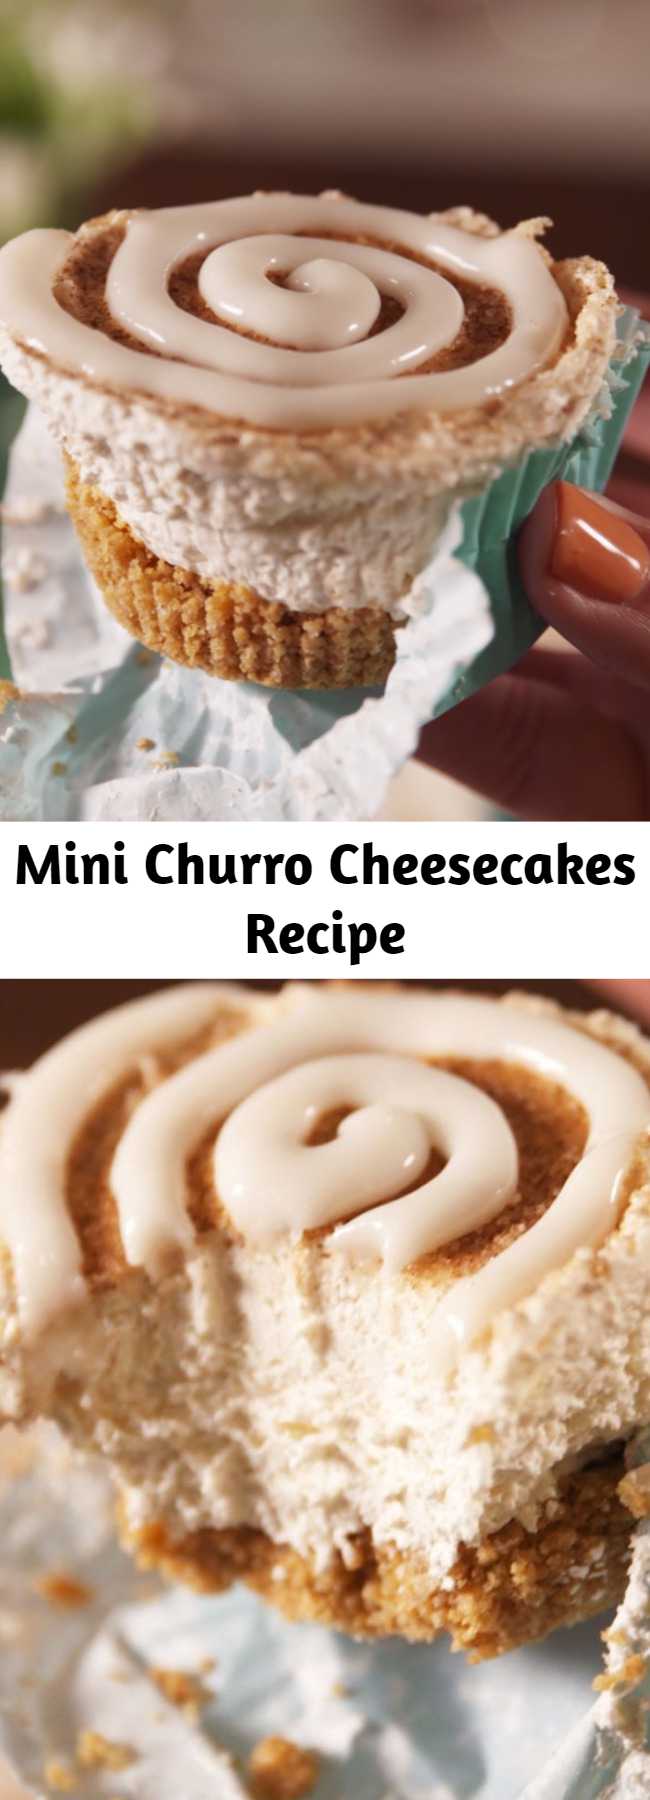 Mini Churro Cheesecakes Recipe - If a churro and a cheesecake had a baby, this would be it. 